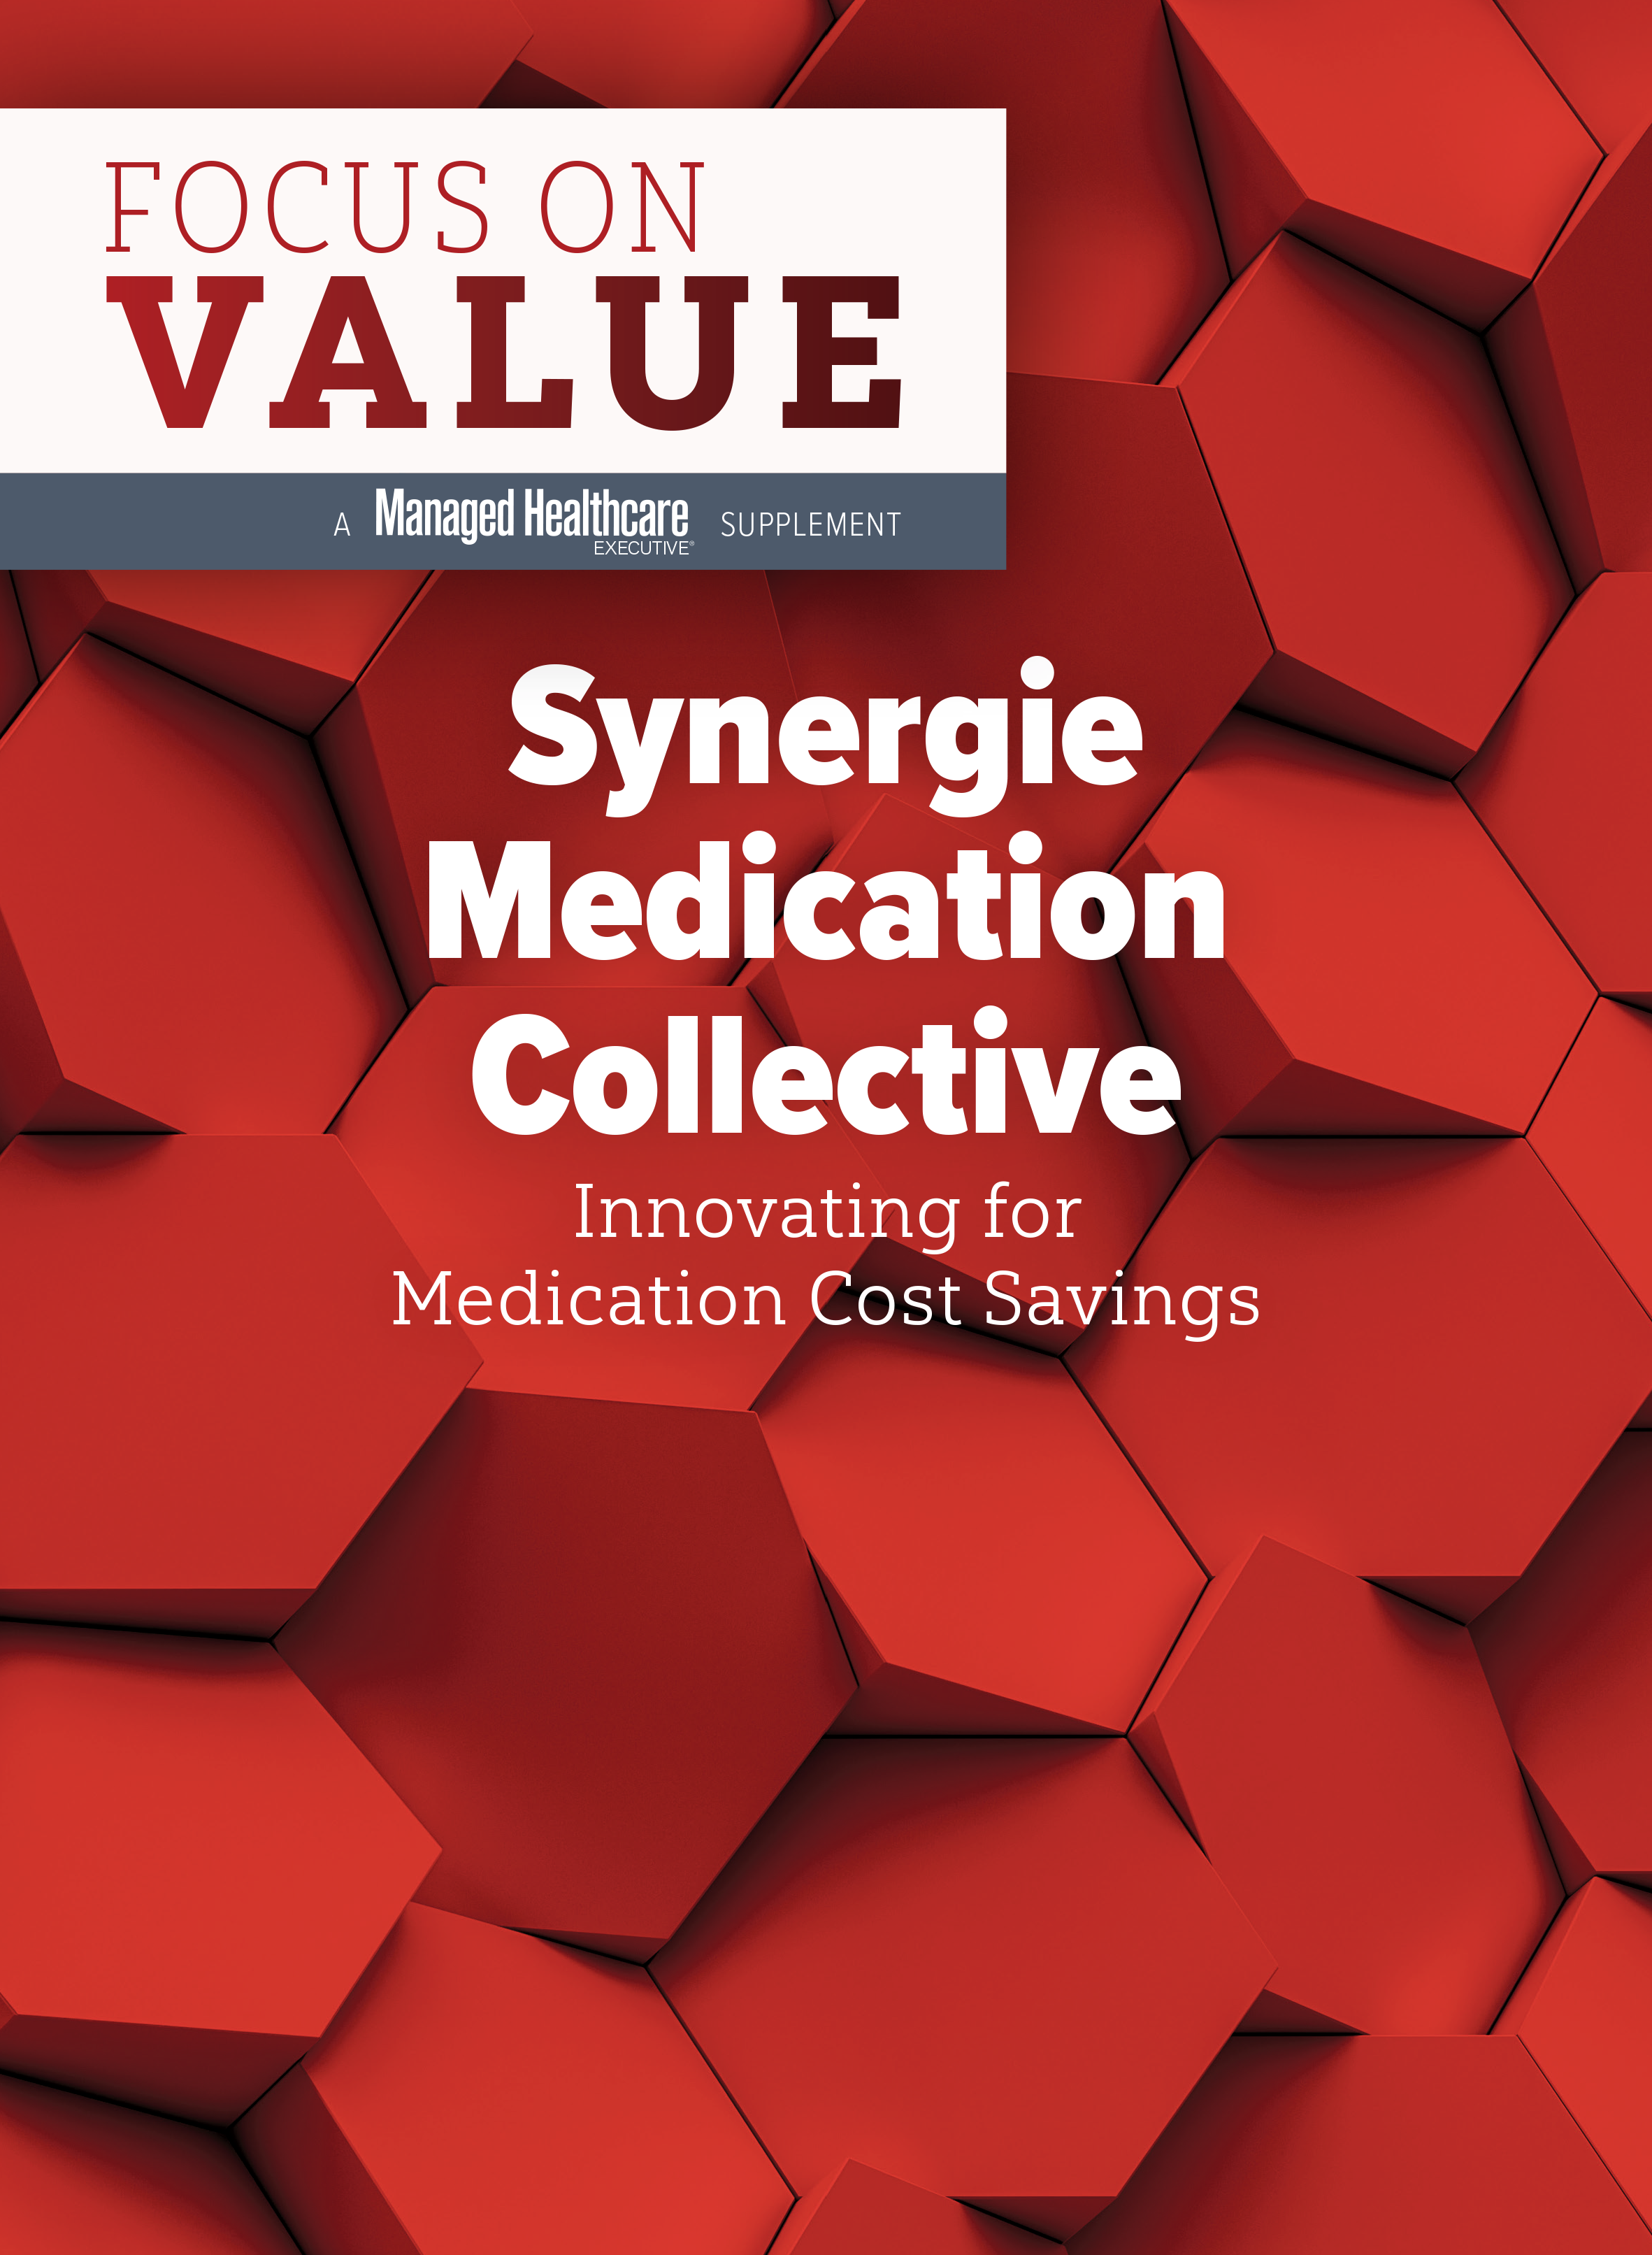 Synergie Medication Collective Innovating for Medication Cost Savings